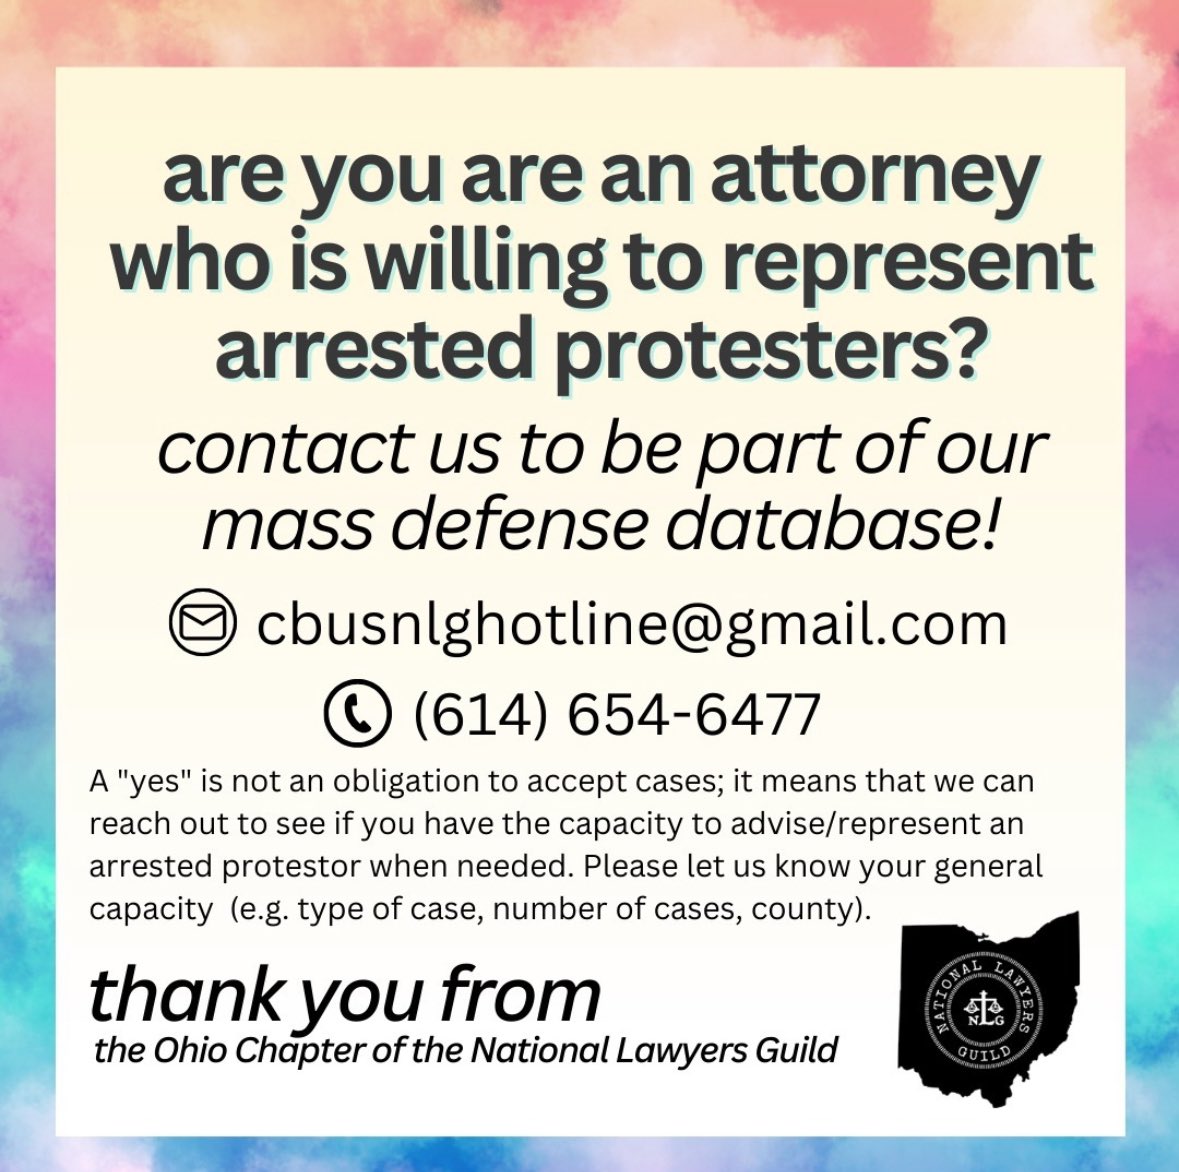 There is a pressing need for local attorneys to represent individuals facing criminal charges due to their participation at protests for a free Palestine. Willing attorneys should contact the Ohio National Lawyers Guild.